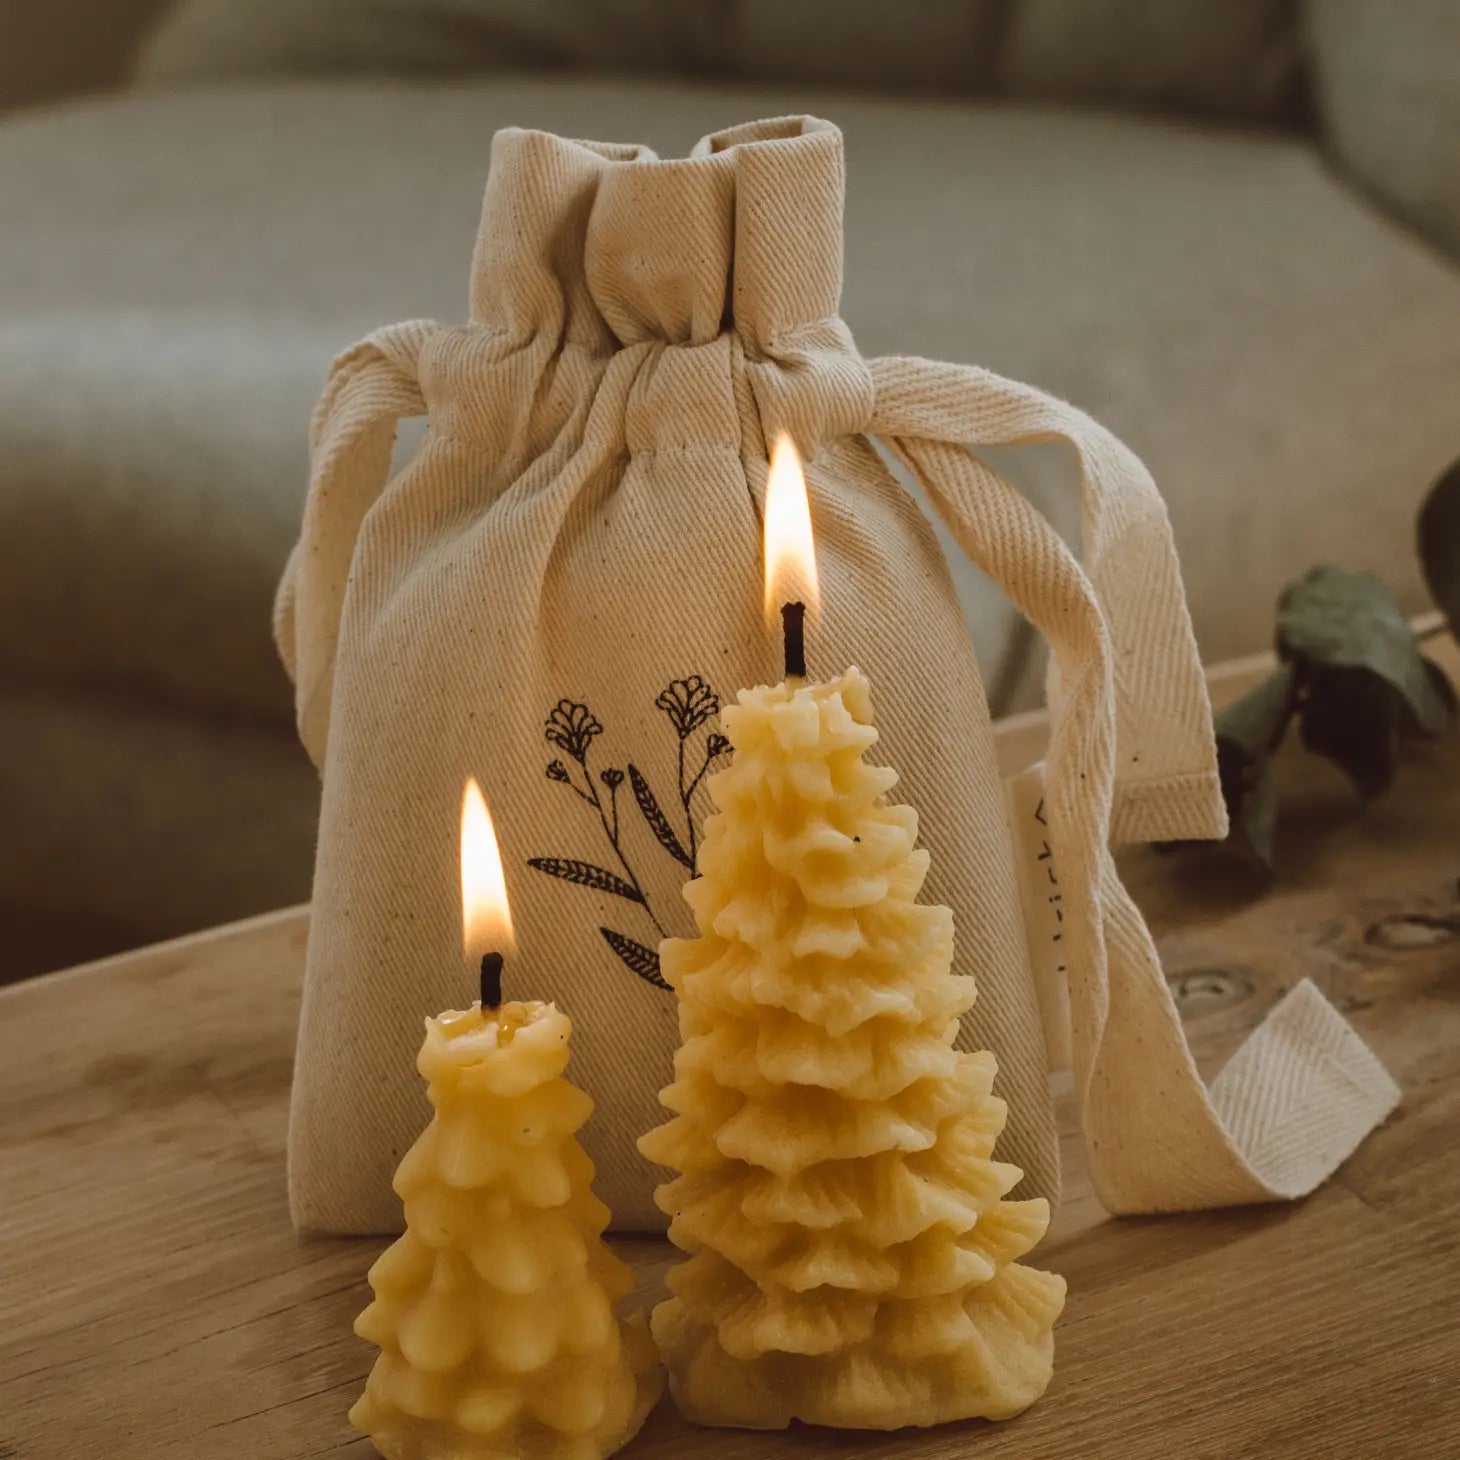 Festive Antique Style Beeswax Candles, Aesthetic